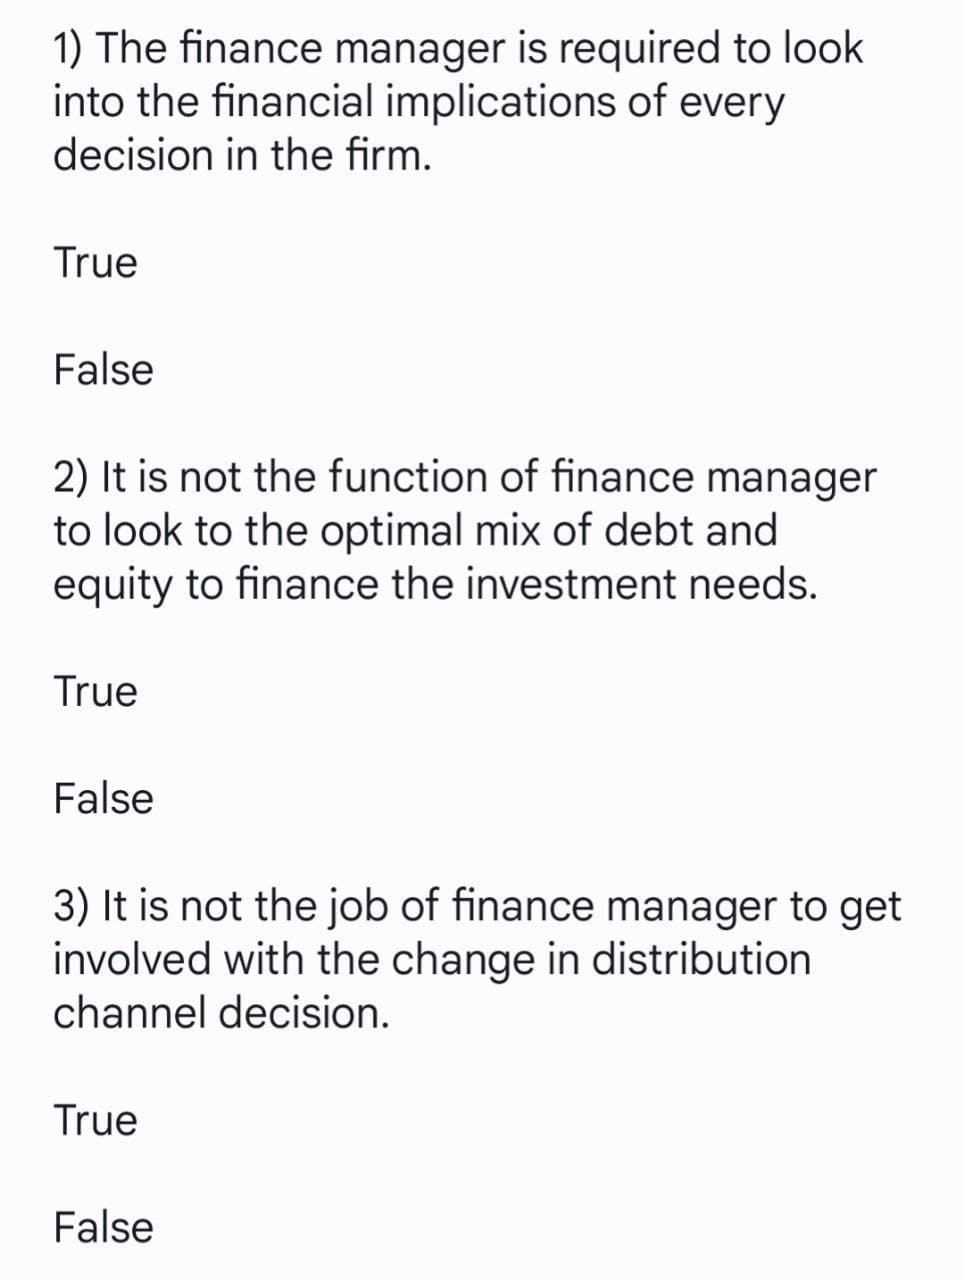 1) The finance manager is required to look
into the financial implications of every
decision in the firm.
True
False
2) It is not the function of finance manager
to look to the optimal mix of debt and
equity to finance the investment needs.
True
False
3) It is not the job of finance manager to get
involved with the change in distribution
channel decision.
True
False
